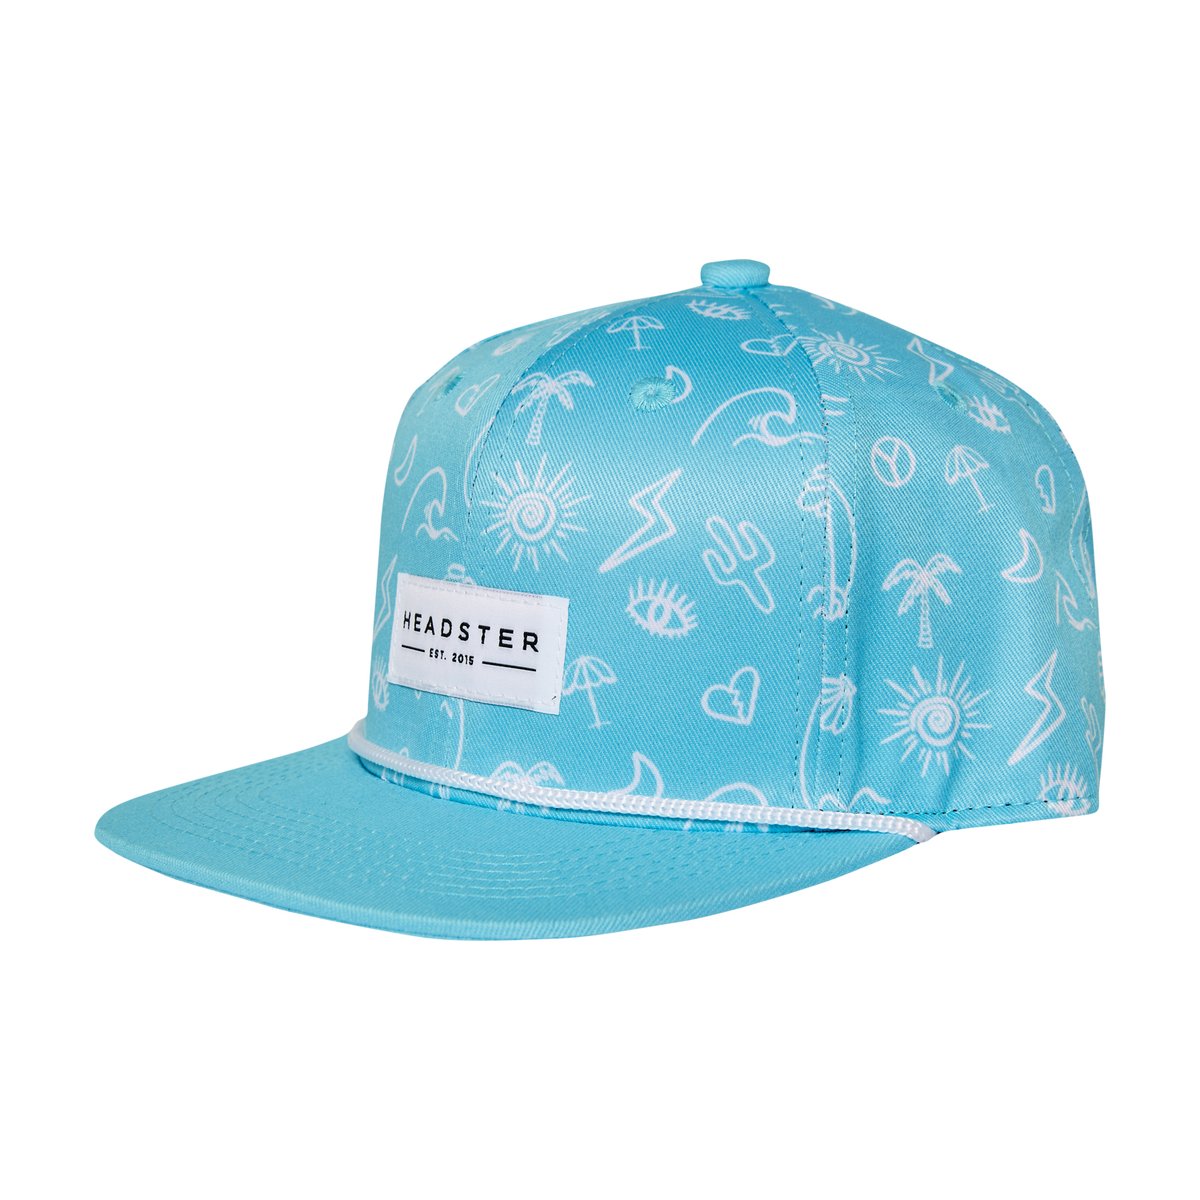 Headster - Casquette - Surf's Up Turquoise, 2-5 ans